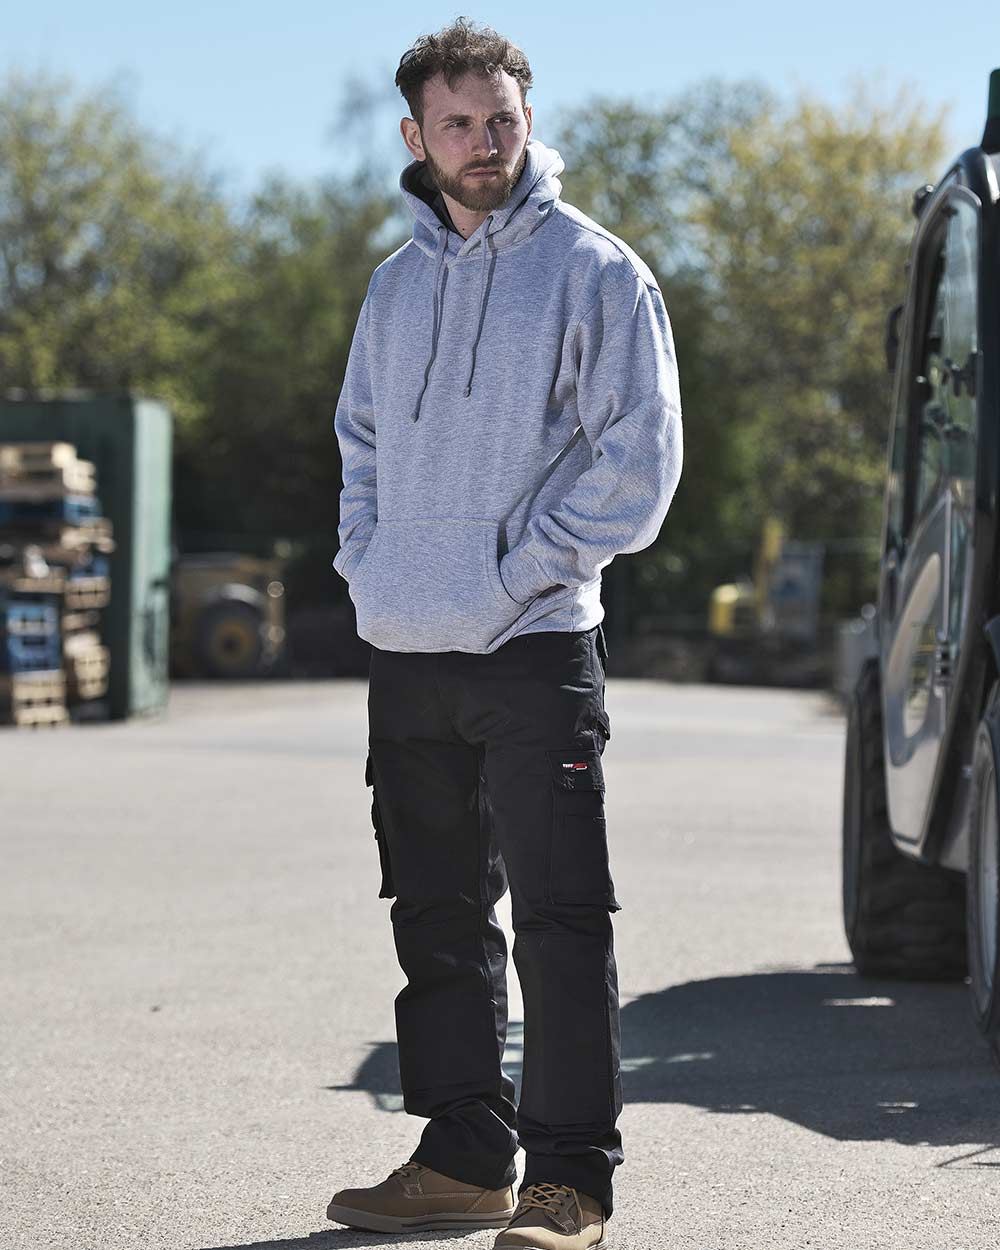 Black Coloured TuffStuff Pro Work Trousers On A Street Background 